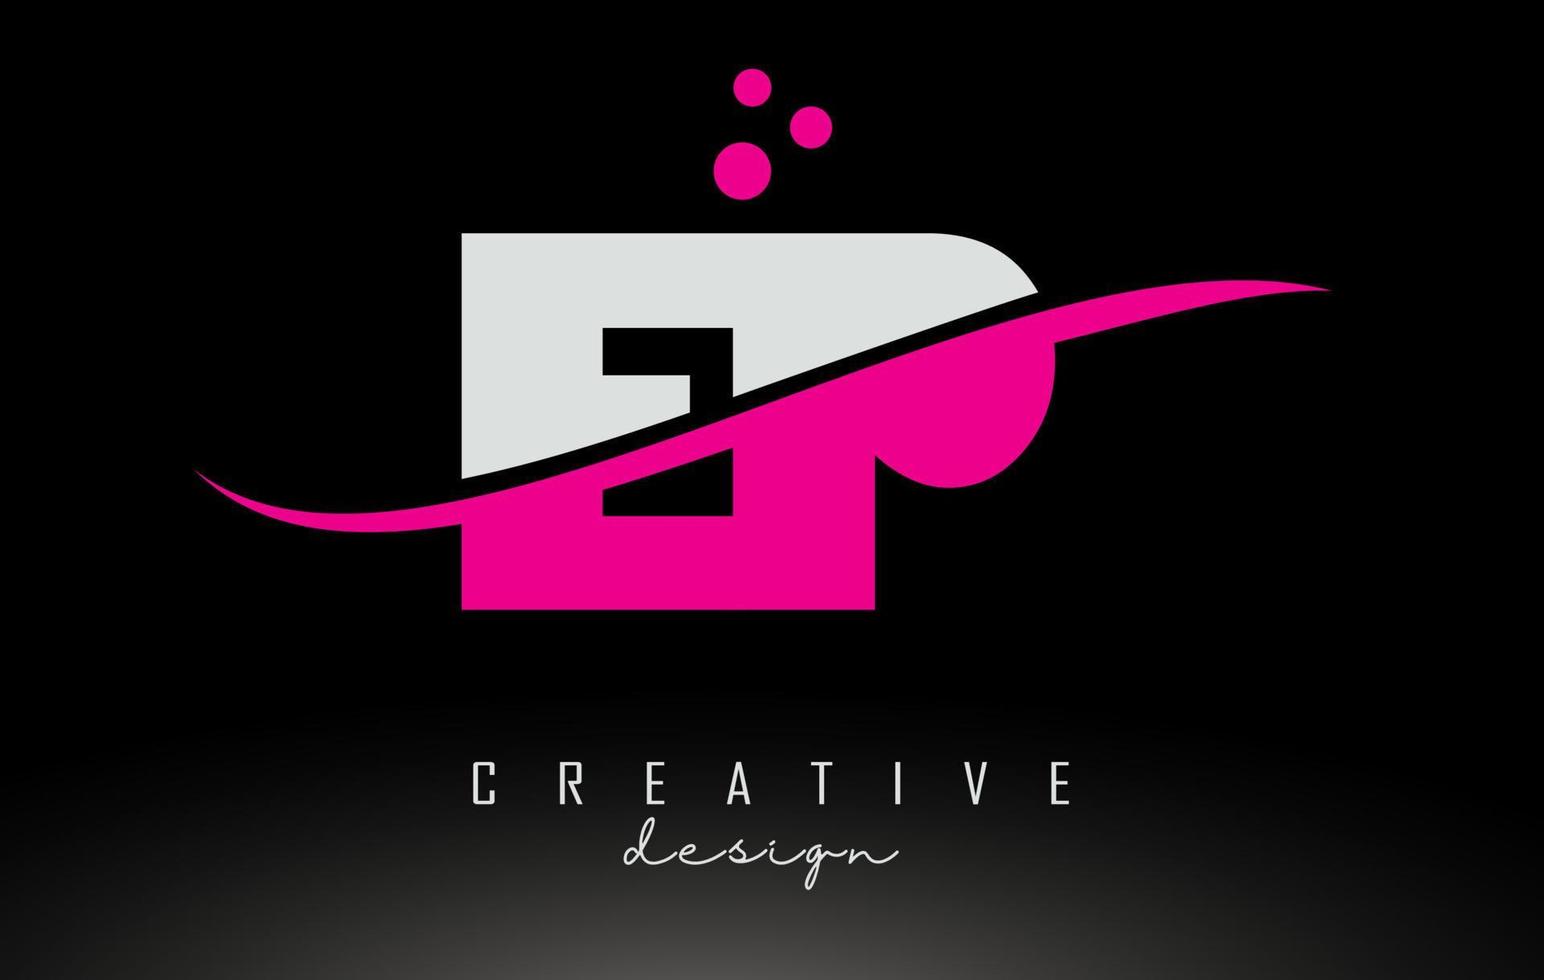 EP E P white and pink letter Logo with Swoosh and dots. vector